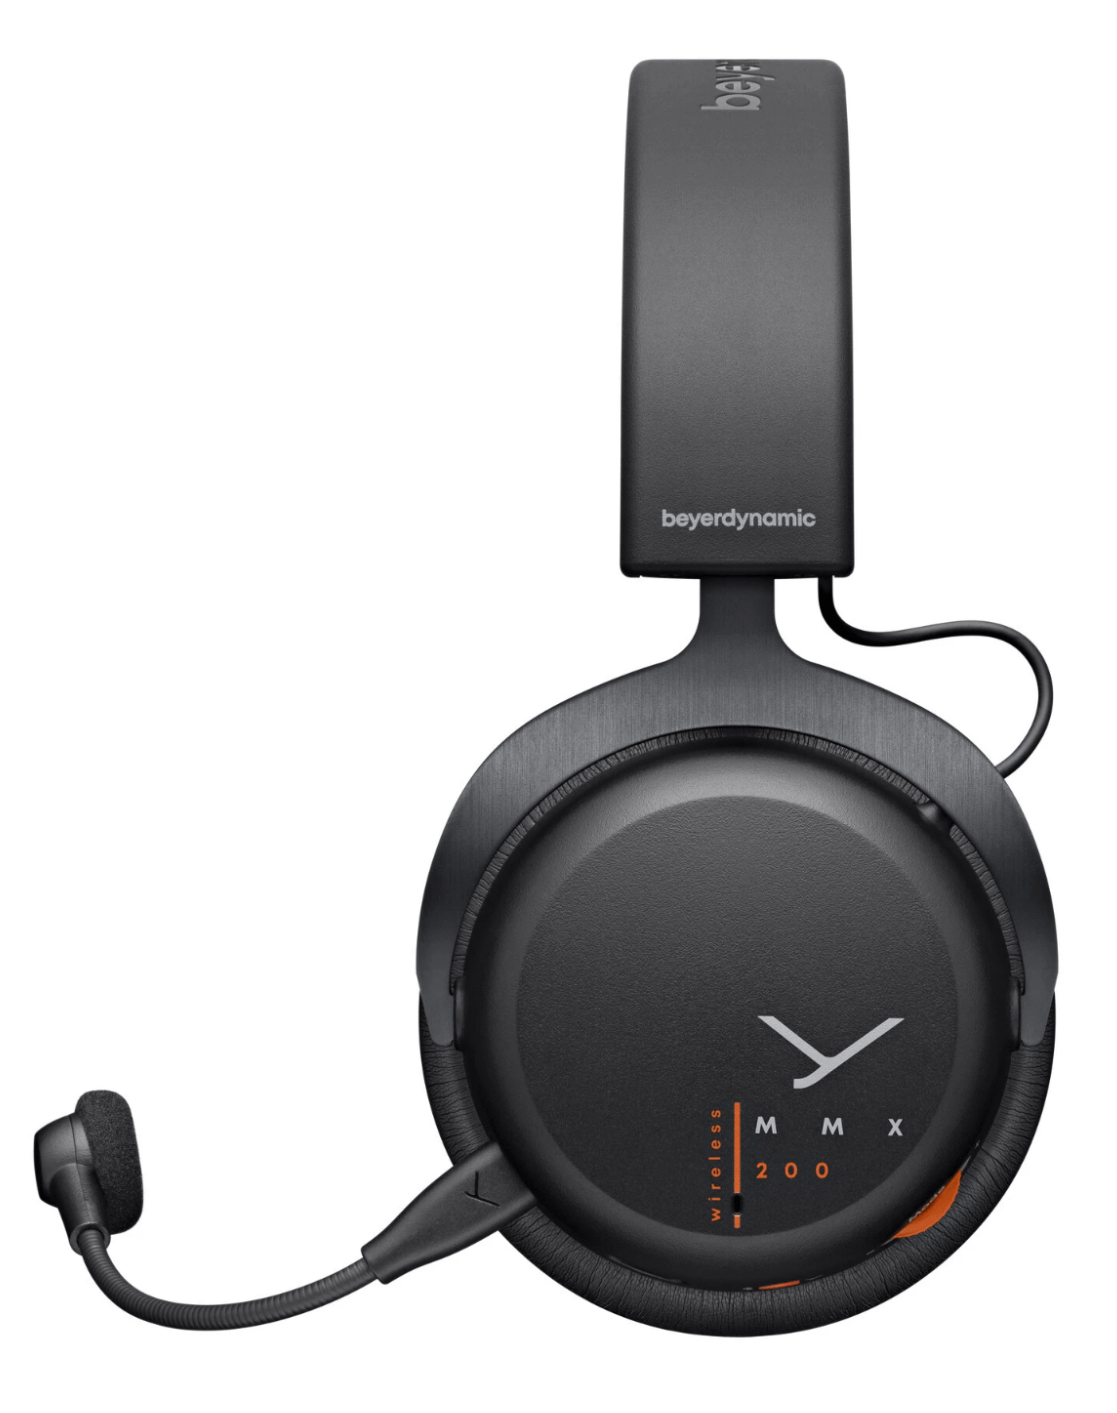 Beyerdynamic enters the gaming scene with its inaugural wireless headset that promises not just sound, but an auditory experience tailored for gamers. c38ac349 image2